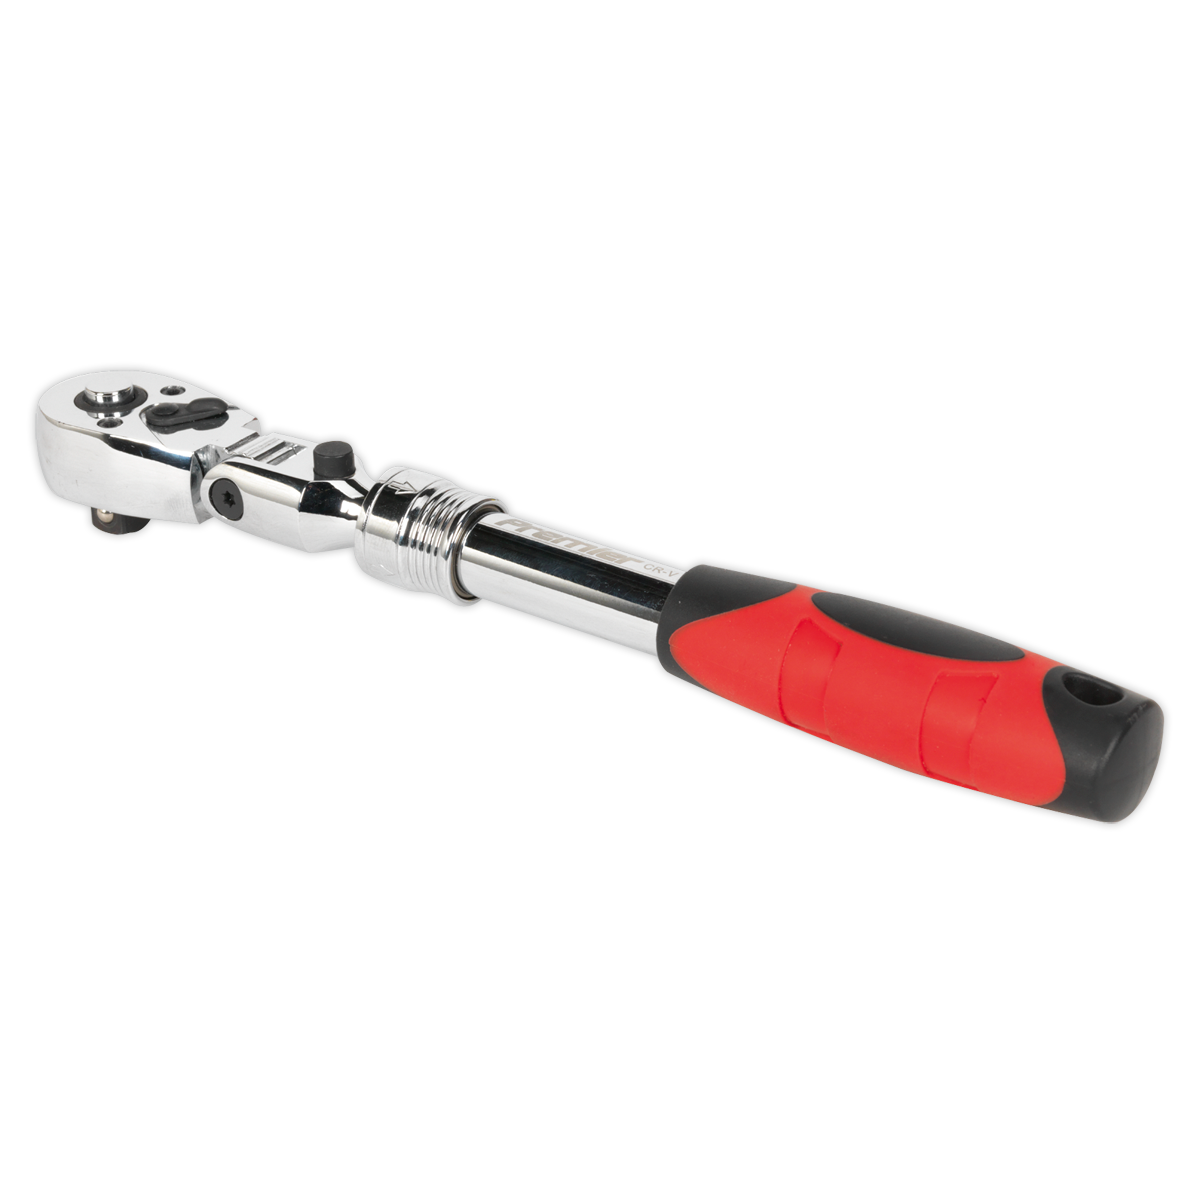 Sealey Flexi-Head Ratchet Wrench 3/8"Sq Drive Extendable